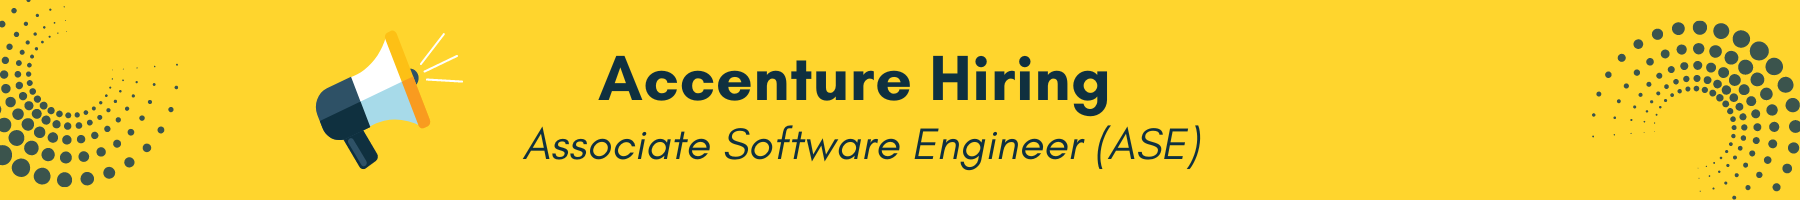 Yellow White Minimalist We Are Hiring Banner (1800 x 200 px).png